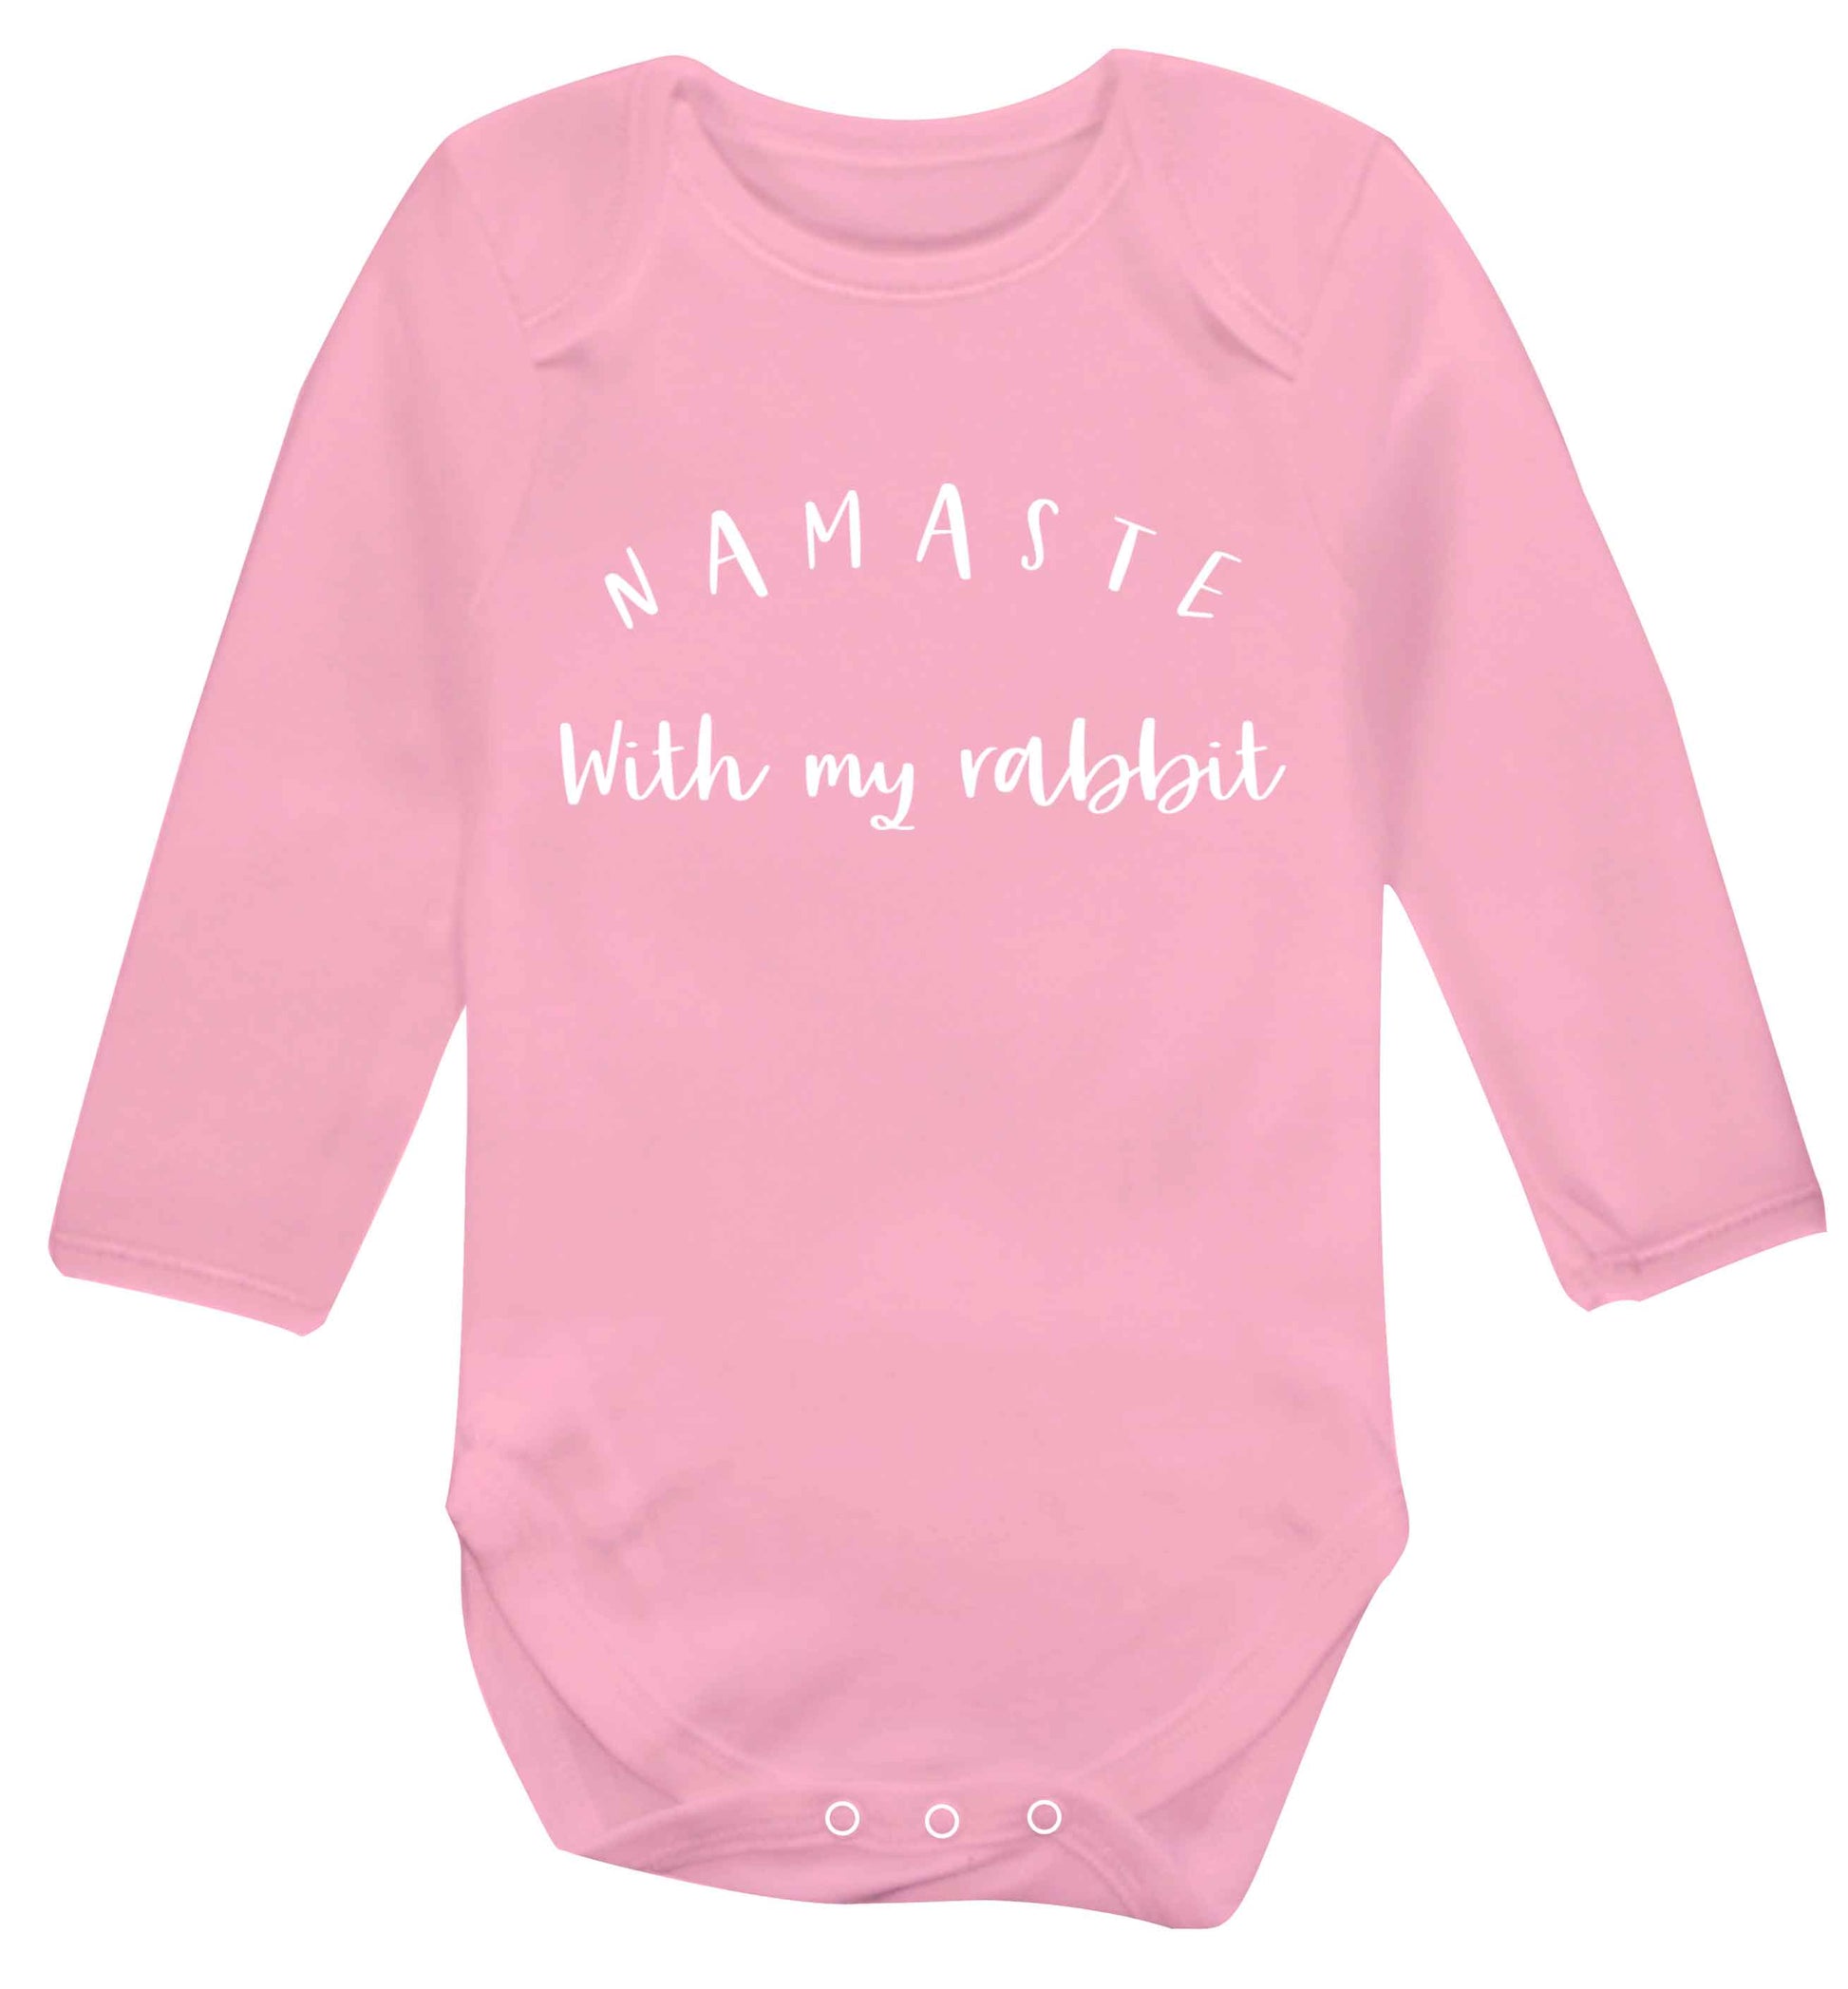 Namaste with my rabbit Baby Vest long sleeved pale pink 6-12 months